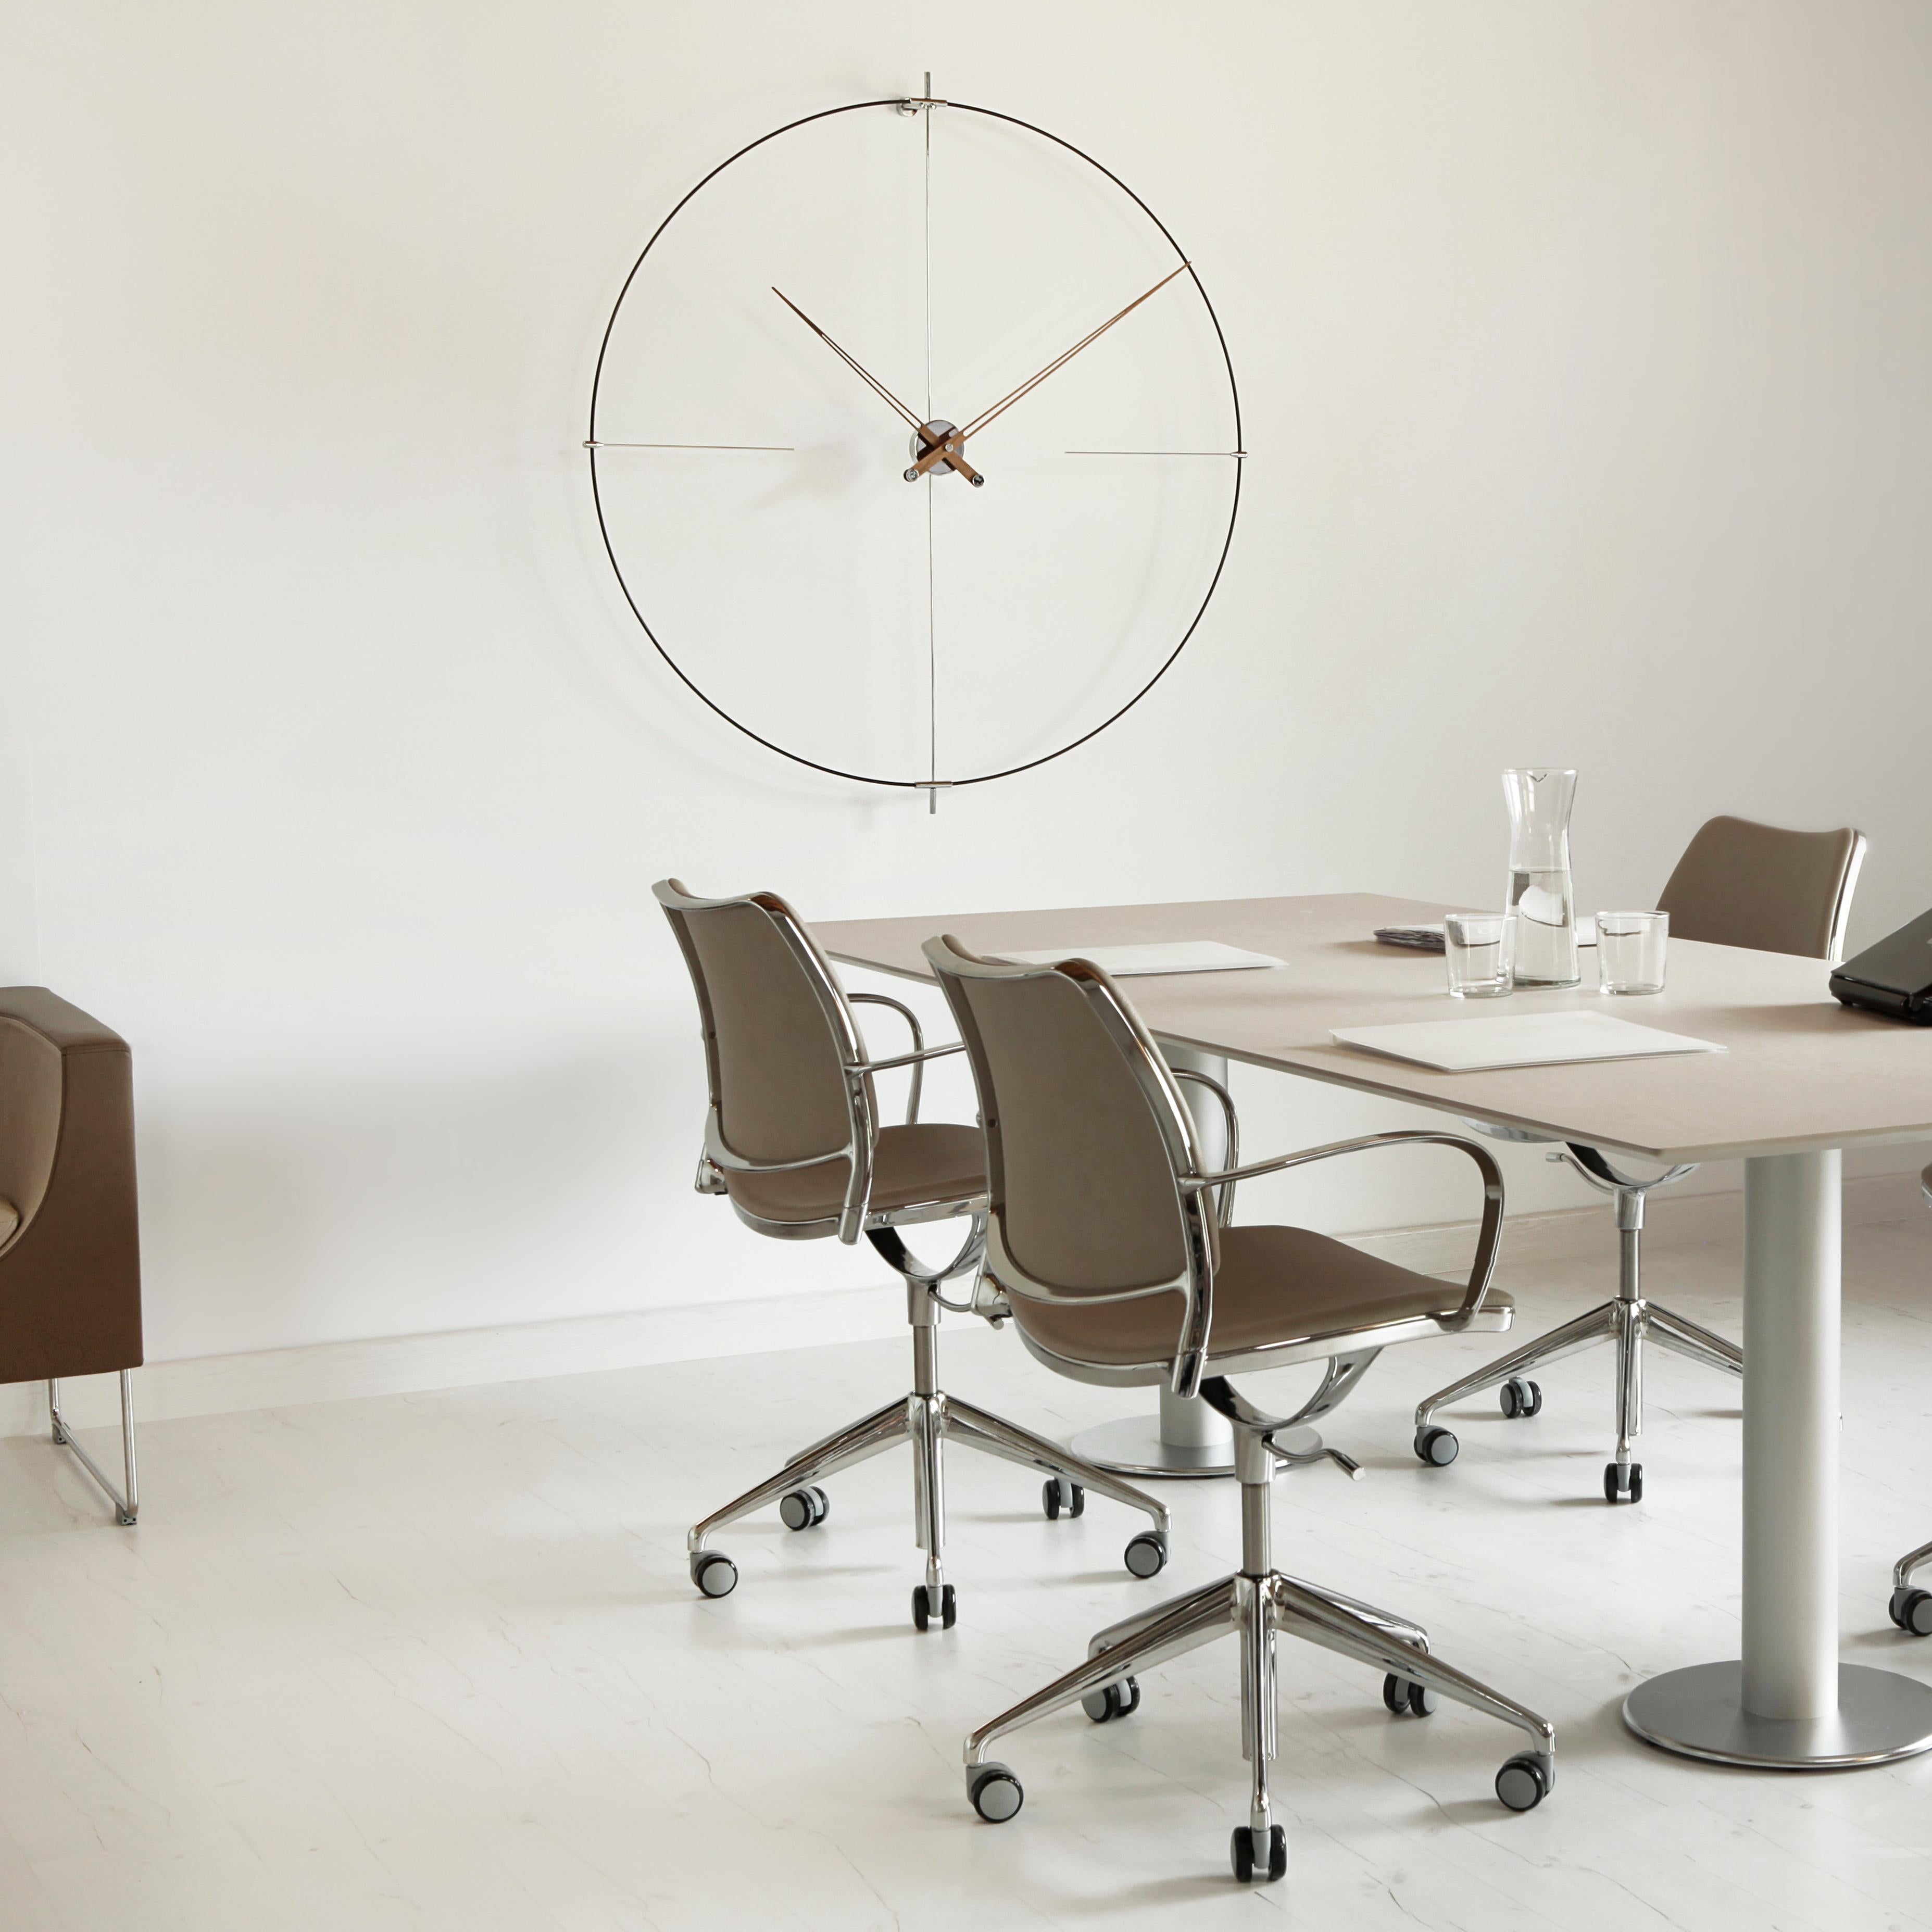 This particular wall clock with lacquered walnut and wooden hands measures 105 cm in diameter and also has parts - such as the hoop and the case - in chromed steel. Its design fits easily in the Nordic and minimalist style. It has an equally